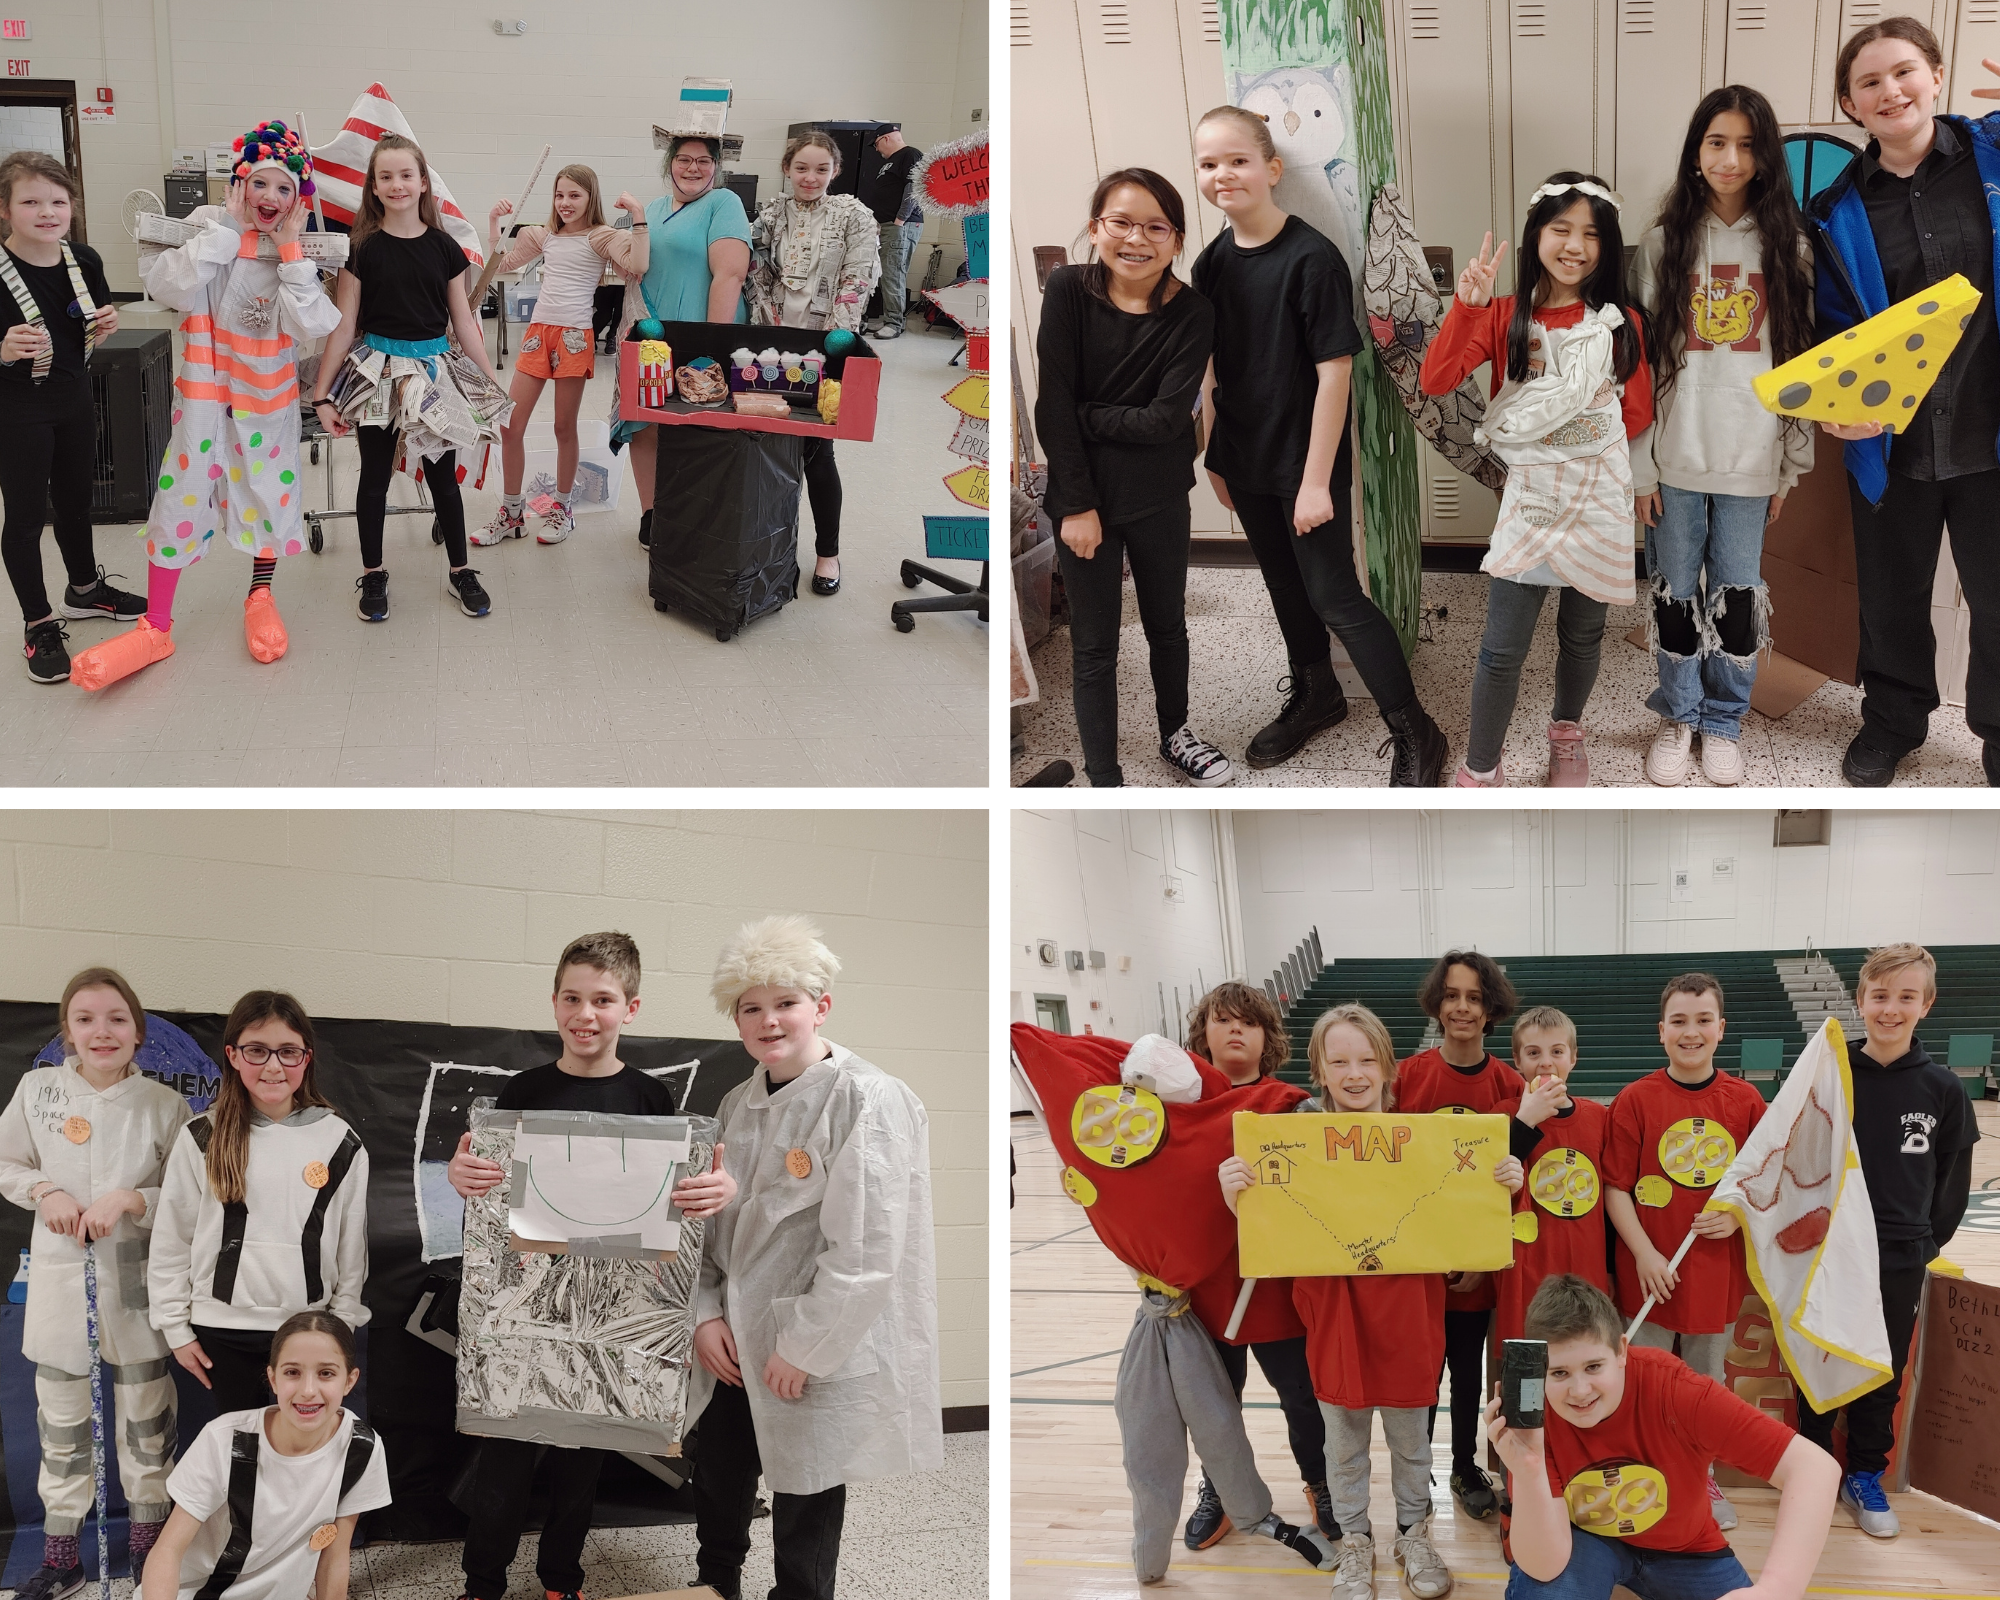 Four Odyssey of the mind teams pose with their props at the competition